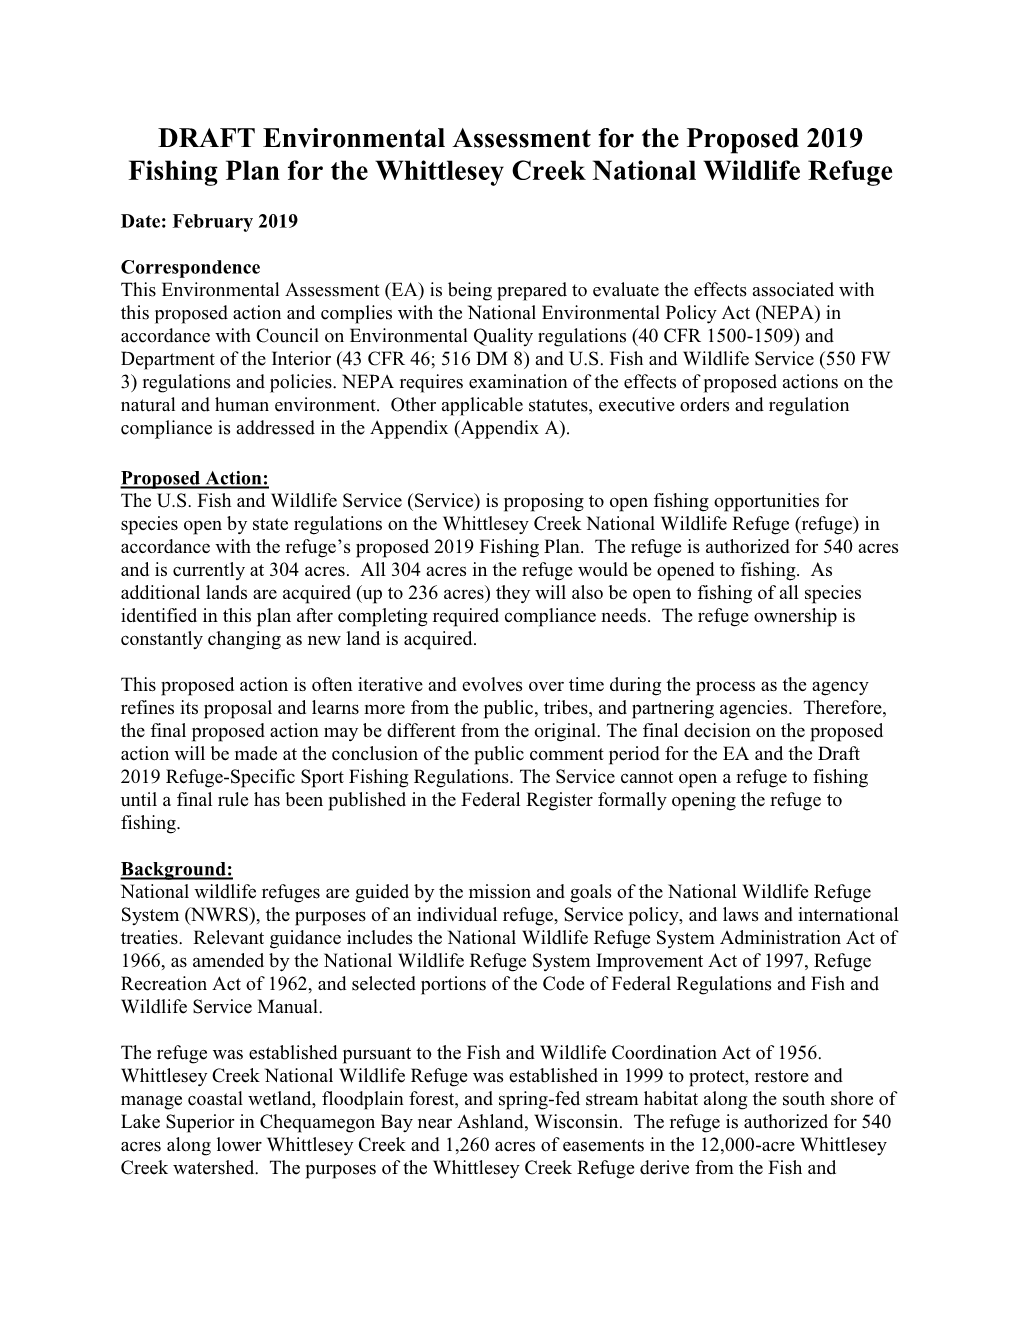 DRAFT Environmental Assessment for the Proposed 2019 Fishing Plan for the Whittlesey Creek National Wildlife Refuge